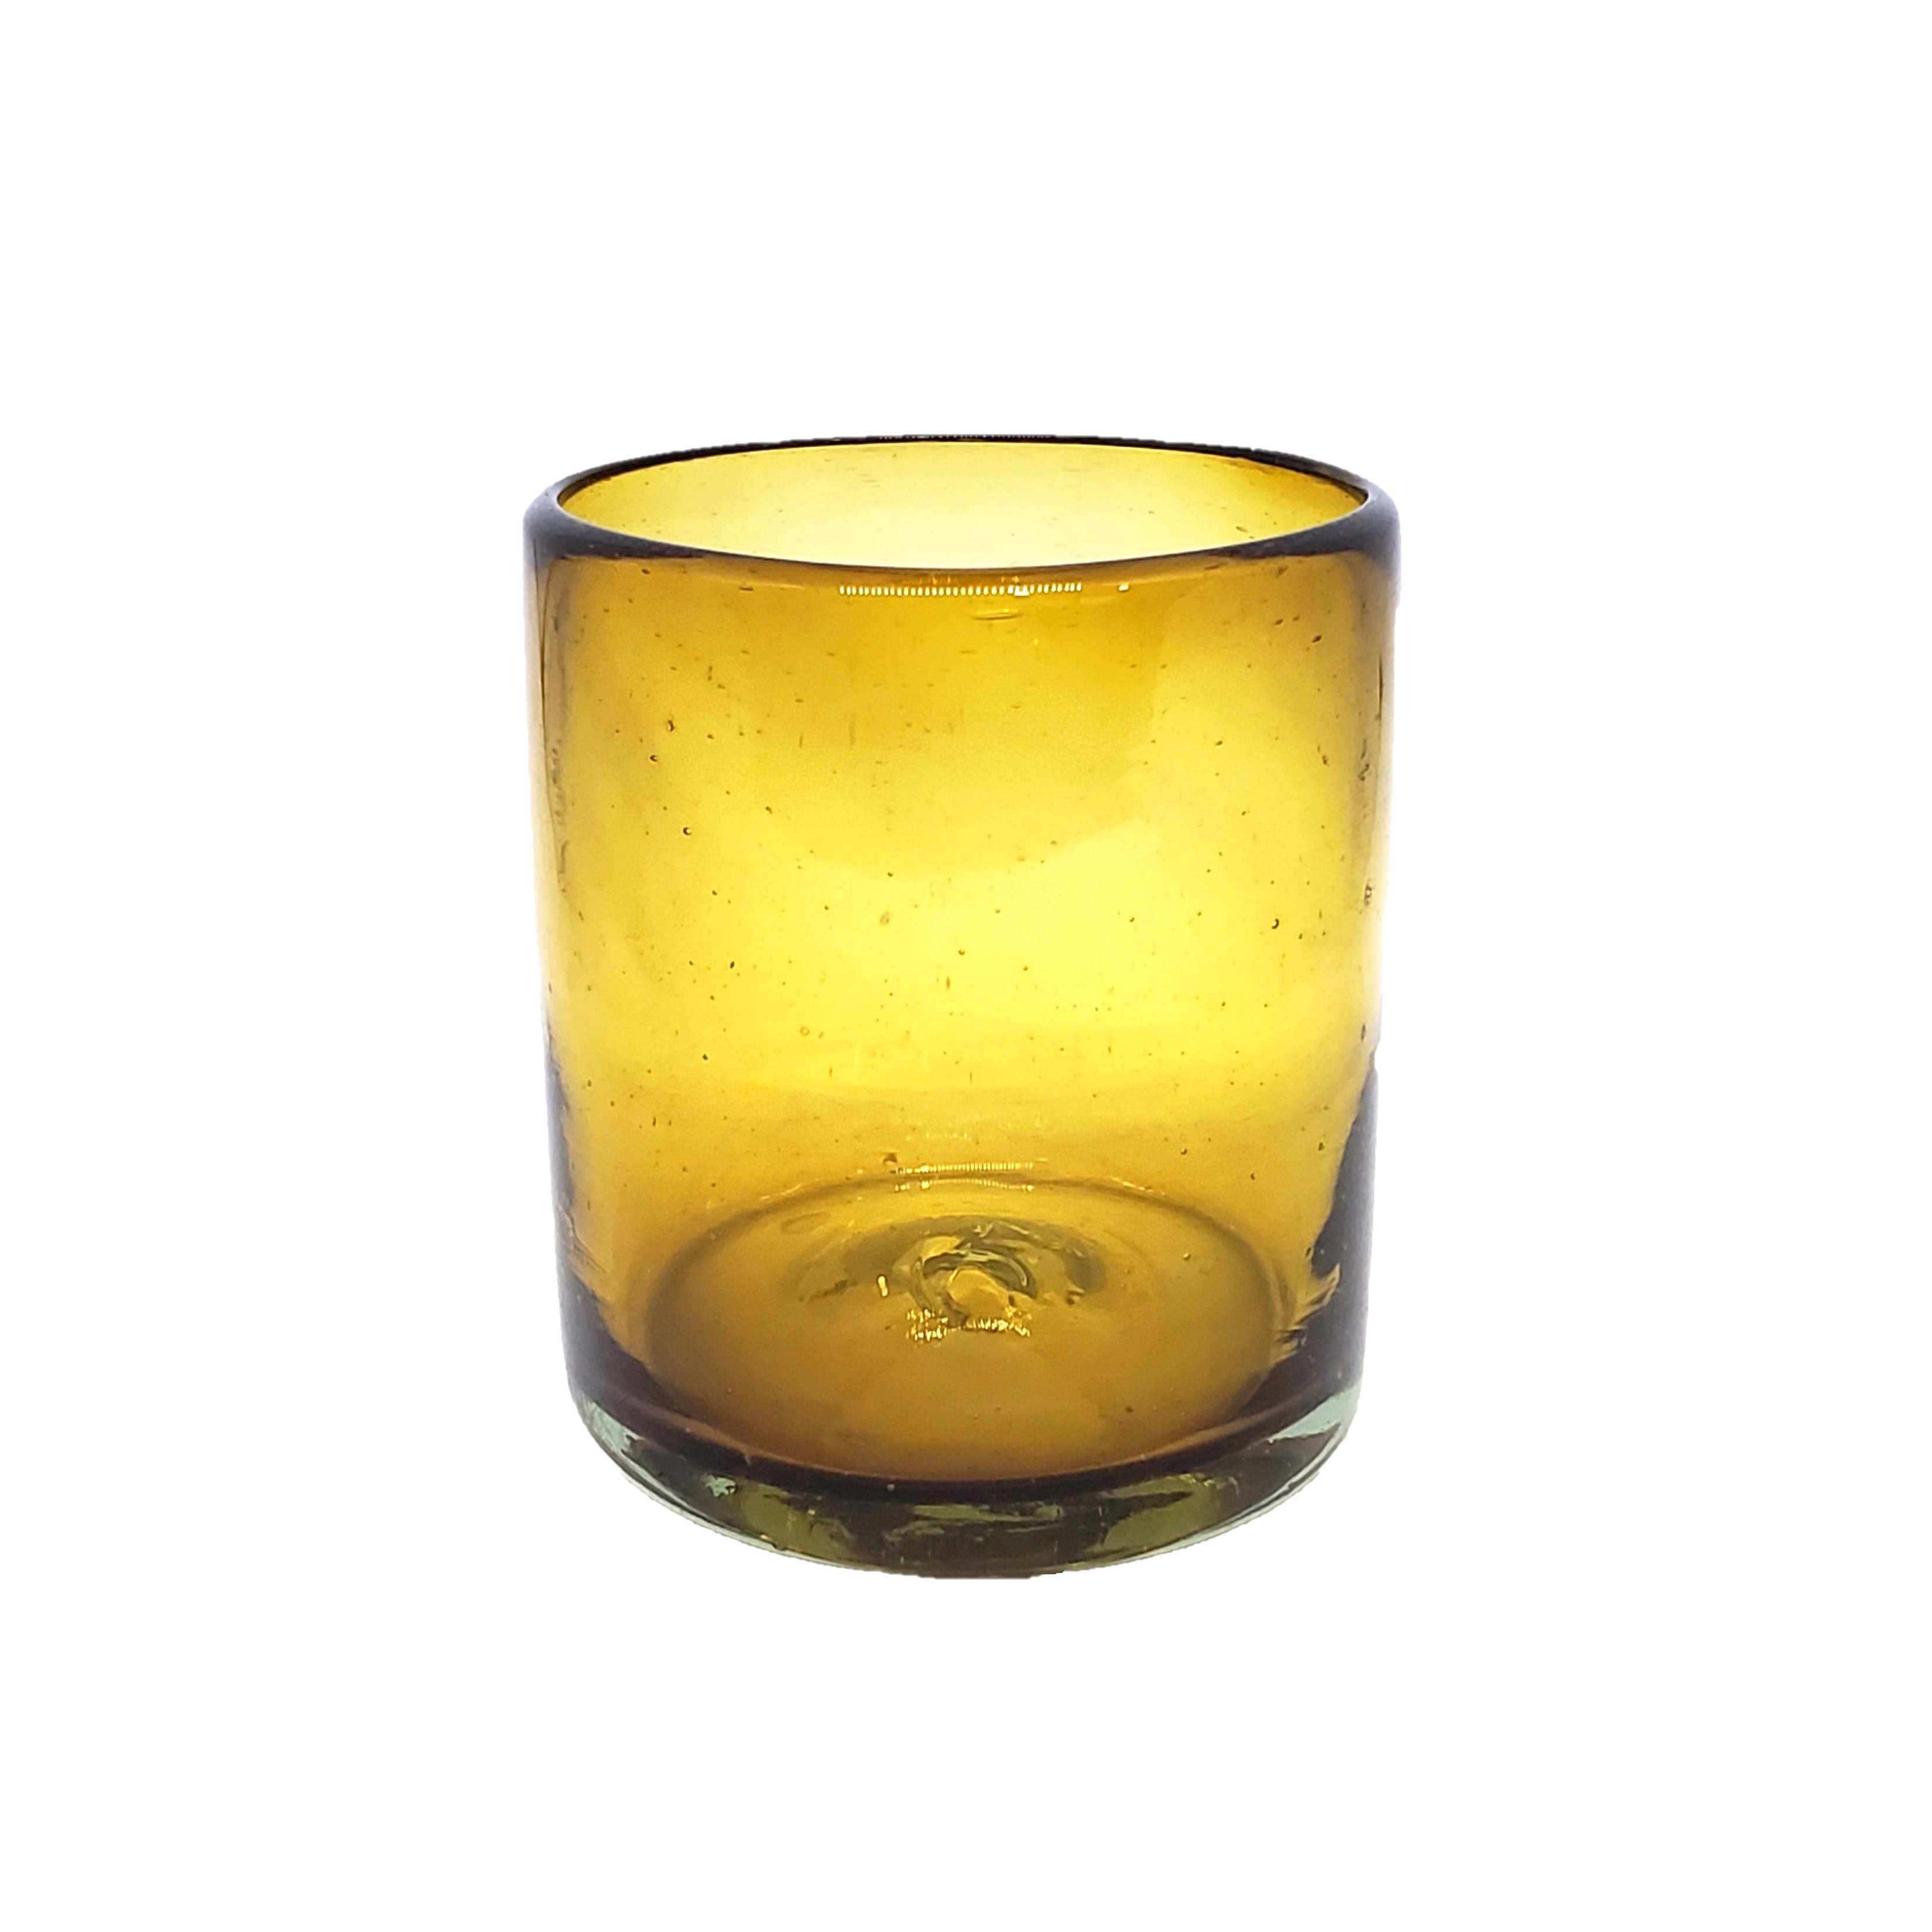 New Items / Solid Amber 9 oz Short Tumblers  / Enhance your favorite drink with these colorful handcrafted glasses.